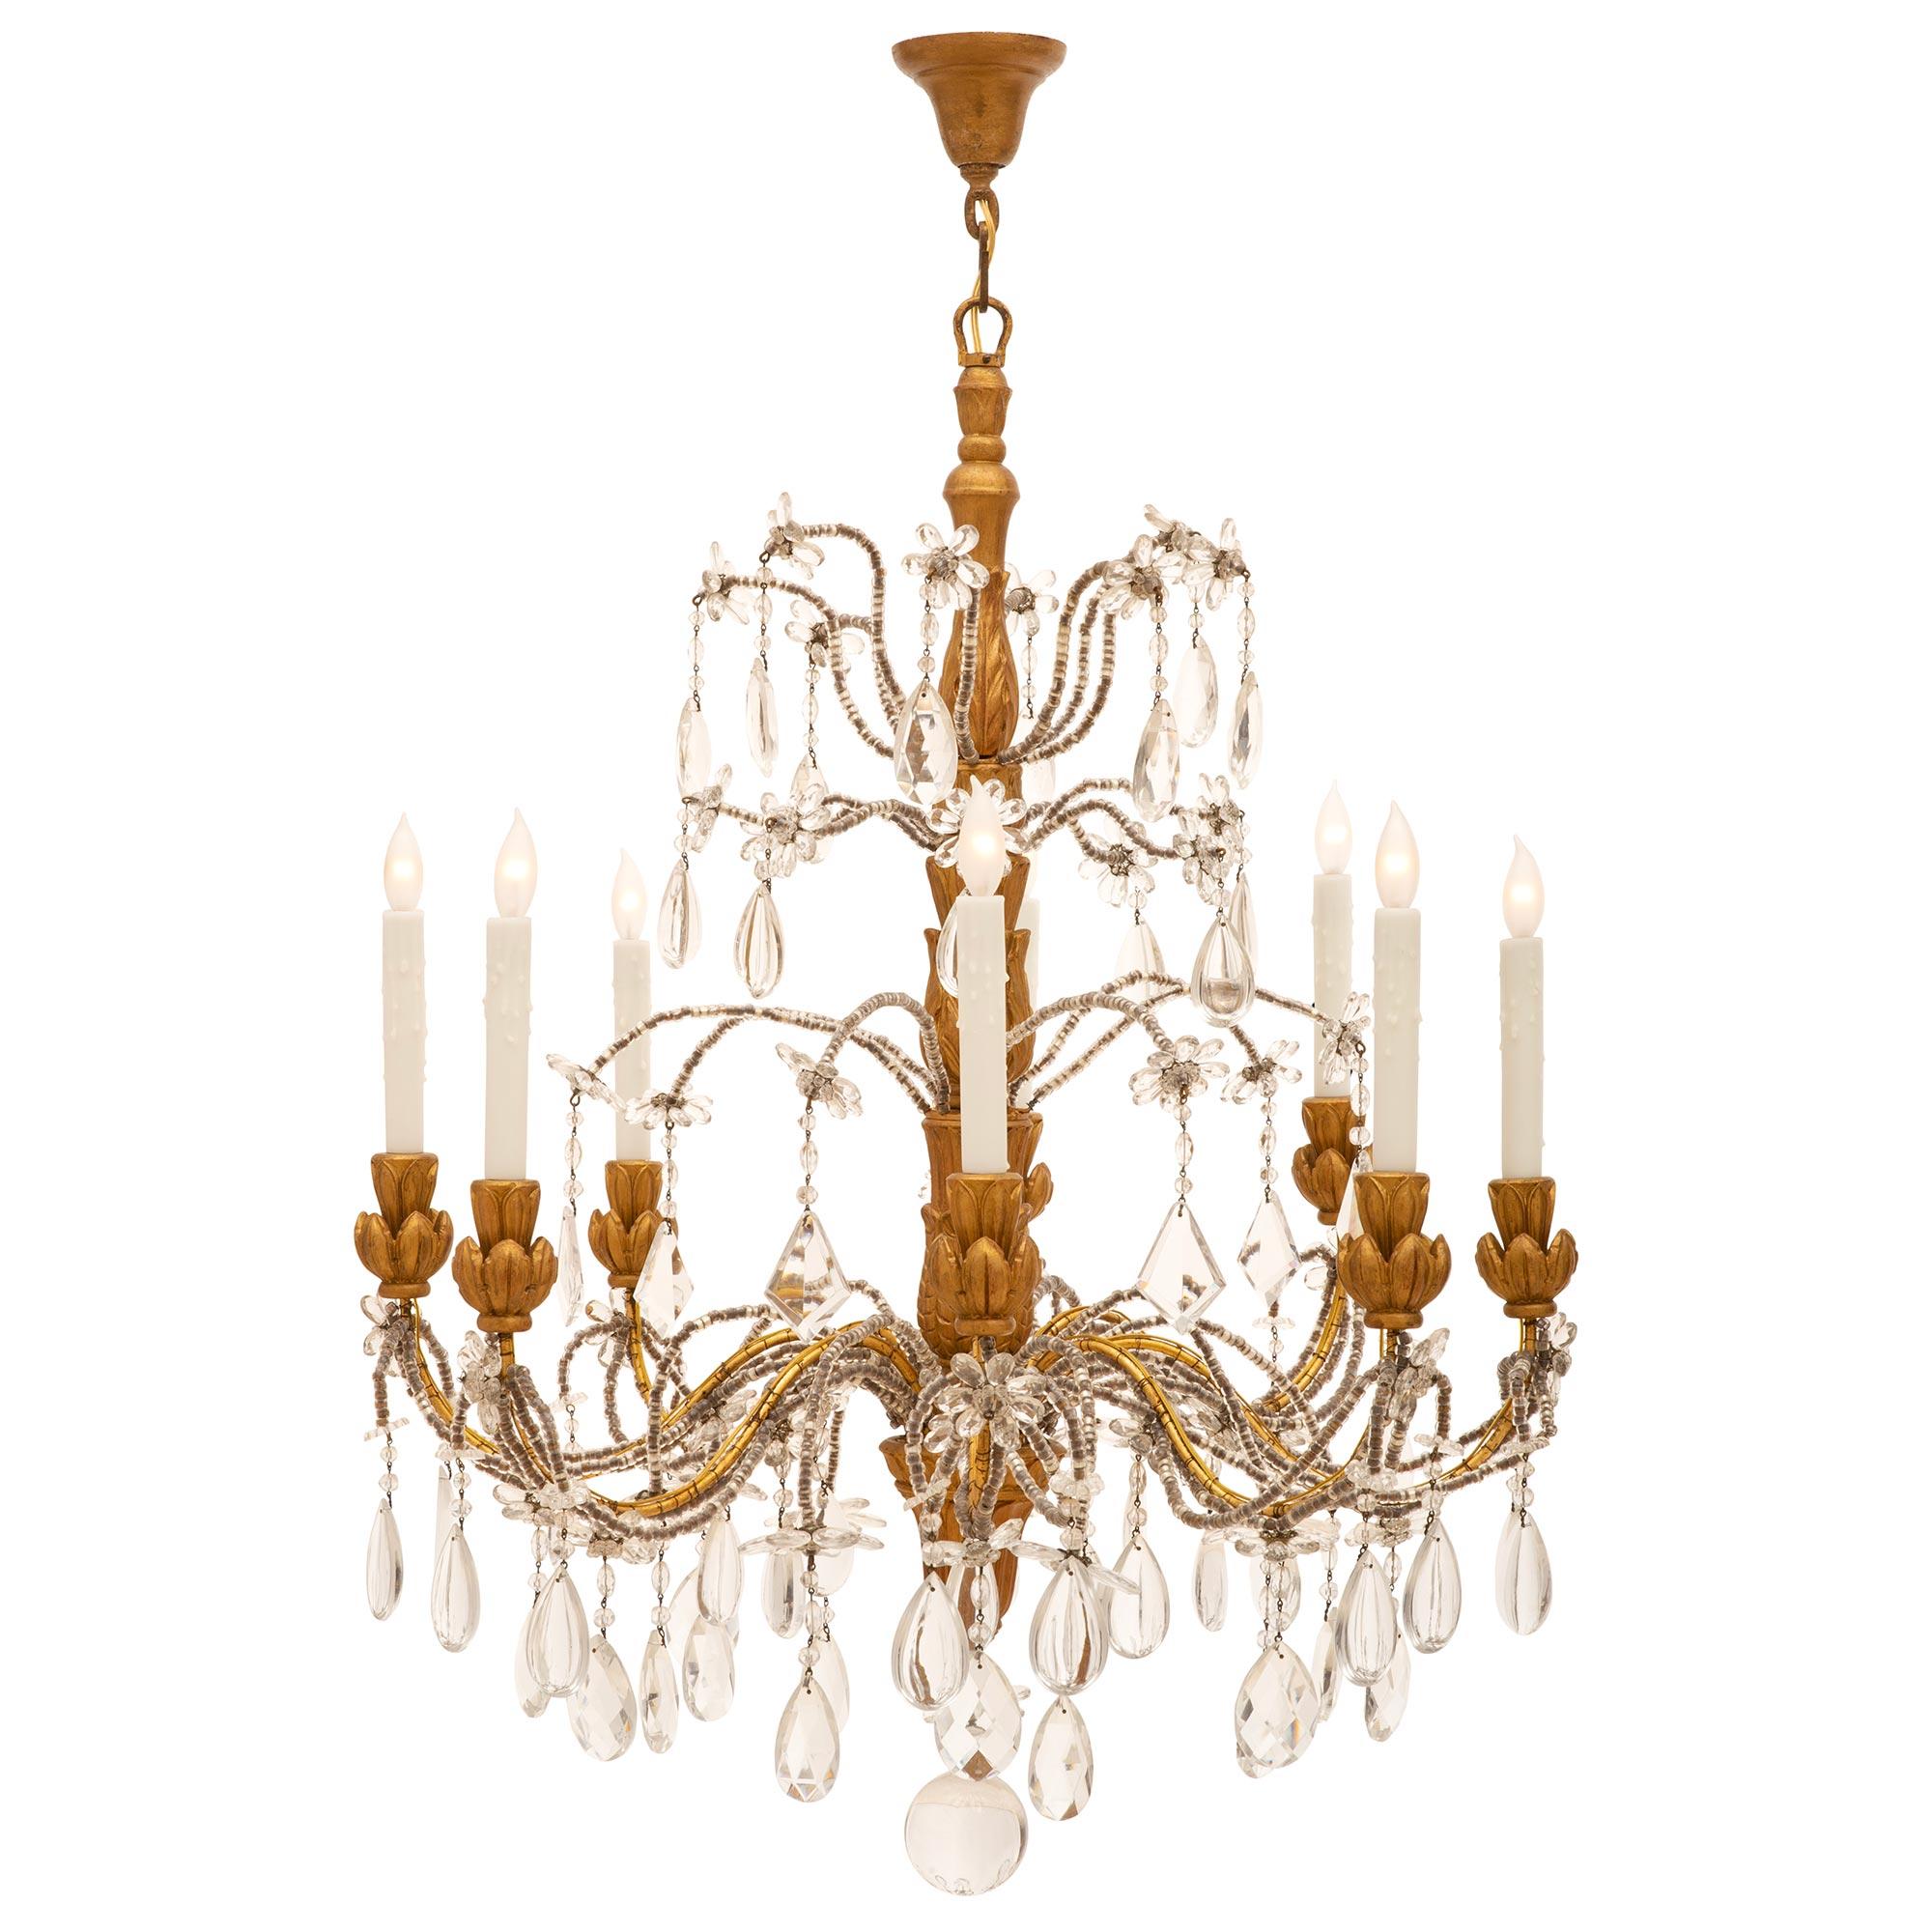 19th Century Italian Eight Light Chandelier In Good Condition For Sale In West Palm Beach, FL